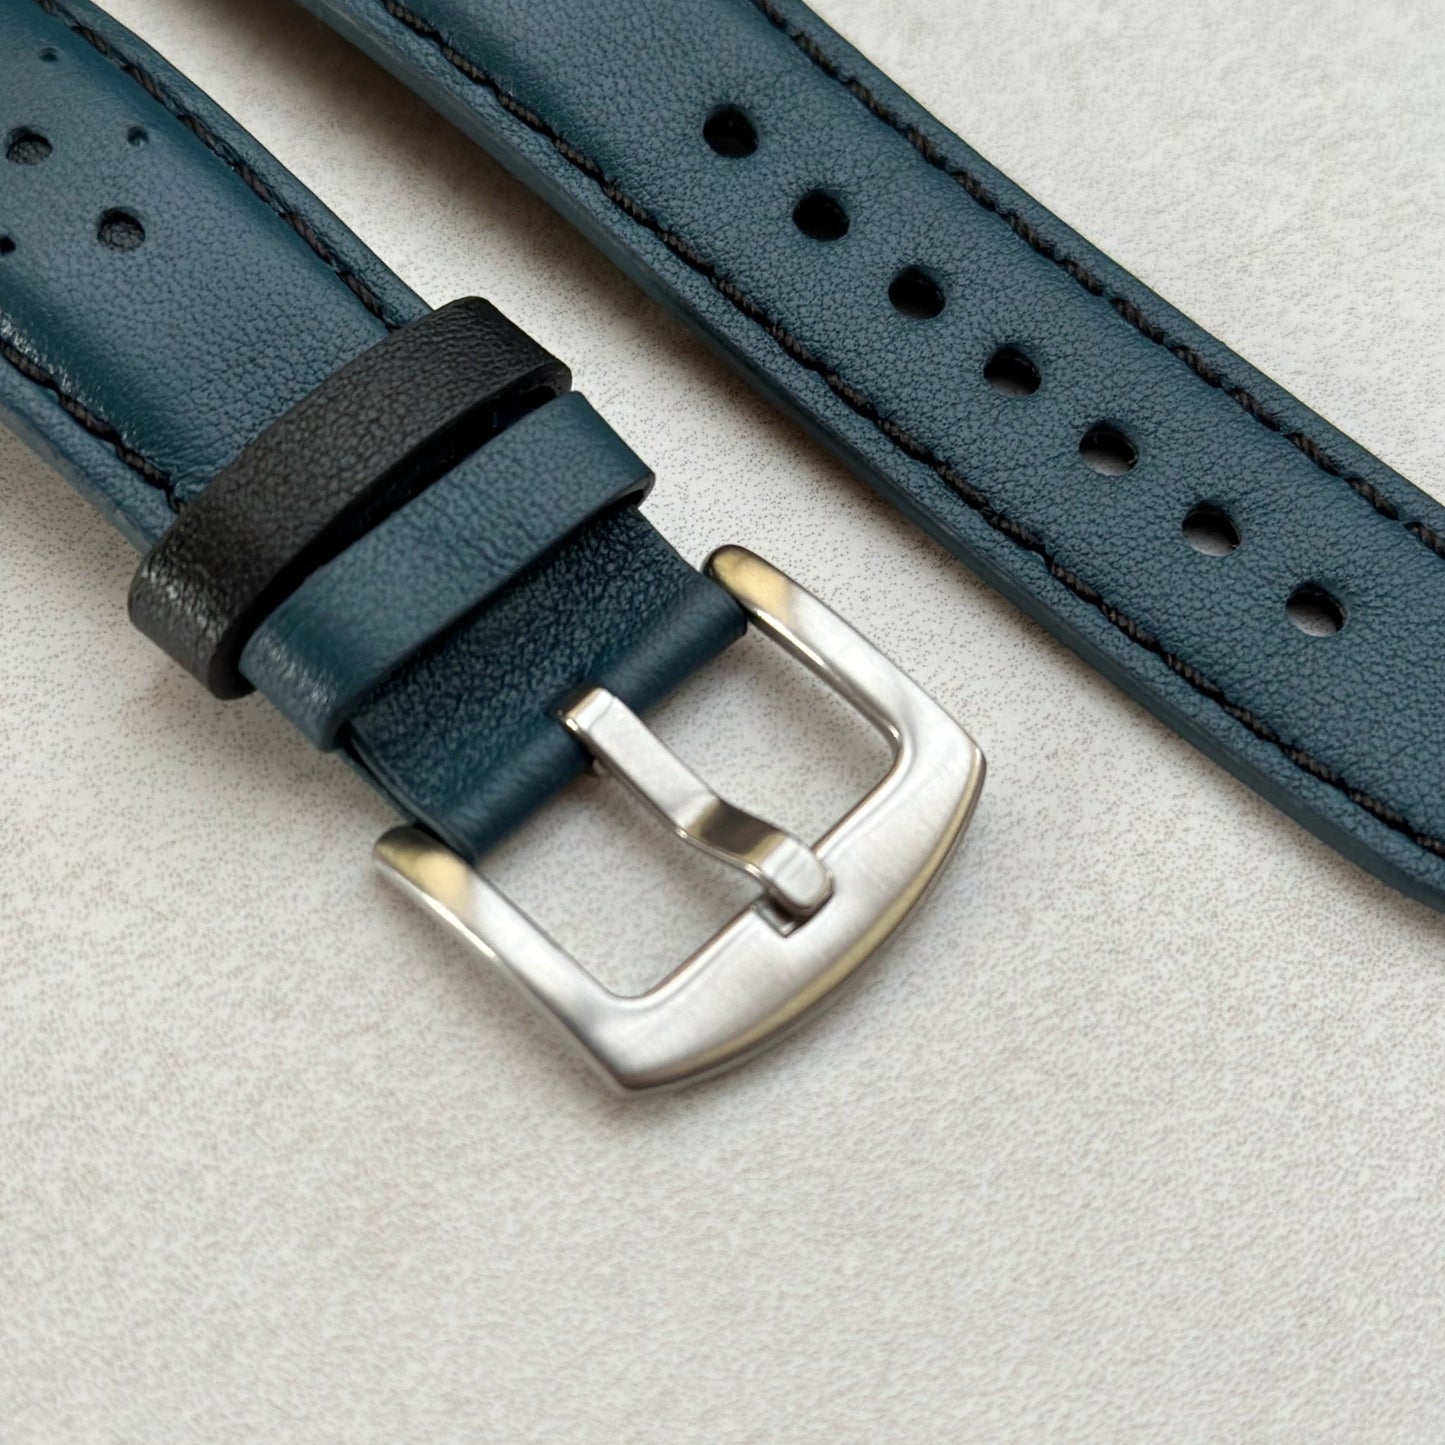 Brushed 316L stainless steel buckle on the Le Mans petrol blue and black leather watch strap.